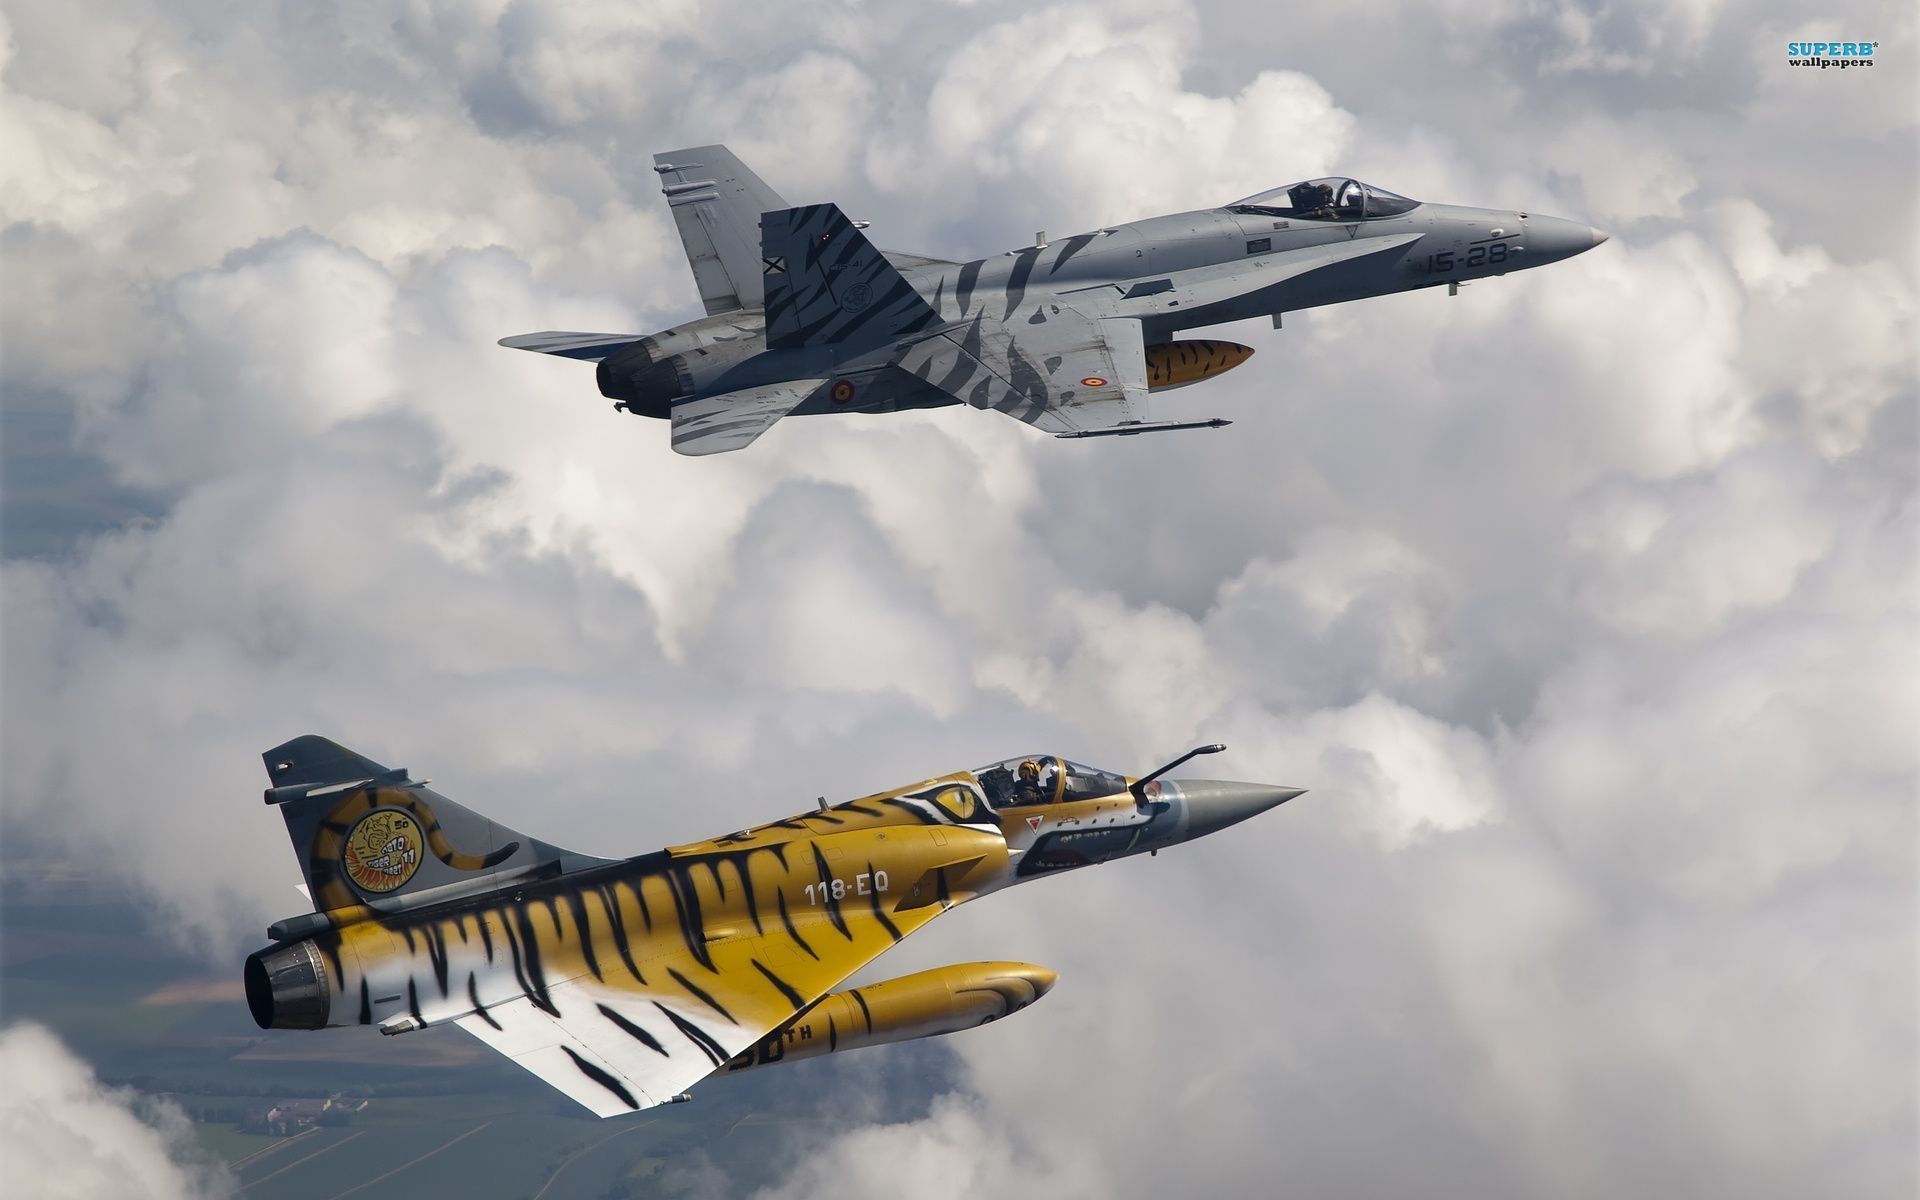 F-18 and Mirage wallpaper - Aircraft wallpapers - #8985